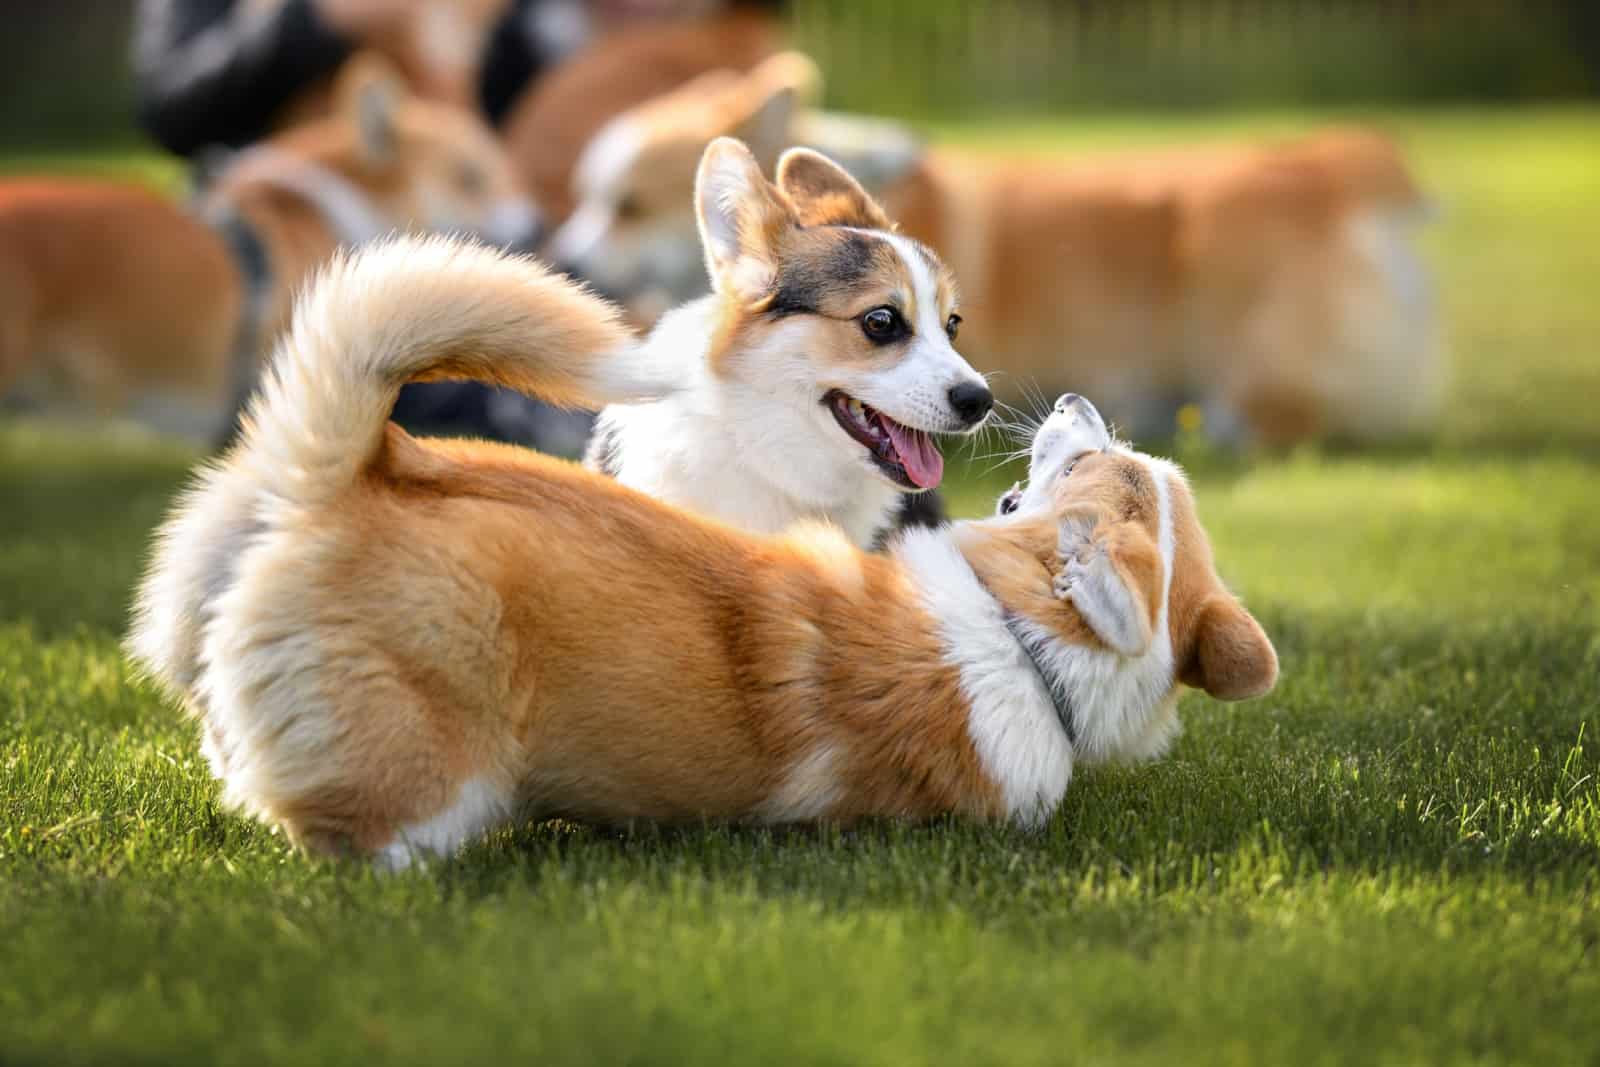 two corgi puppies playing and rolling on grass together